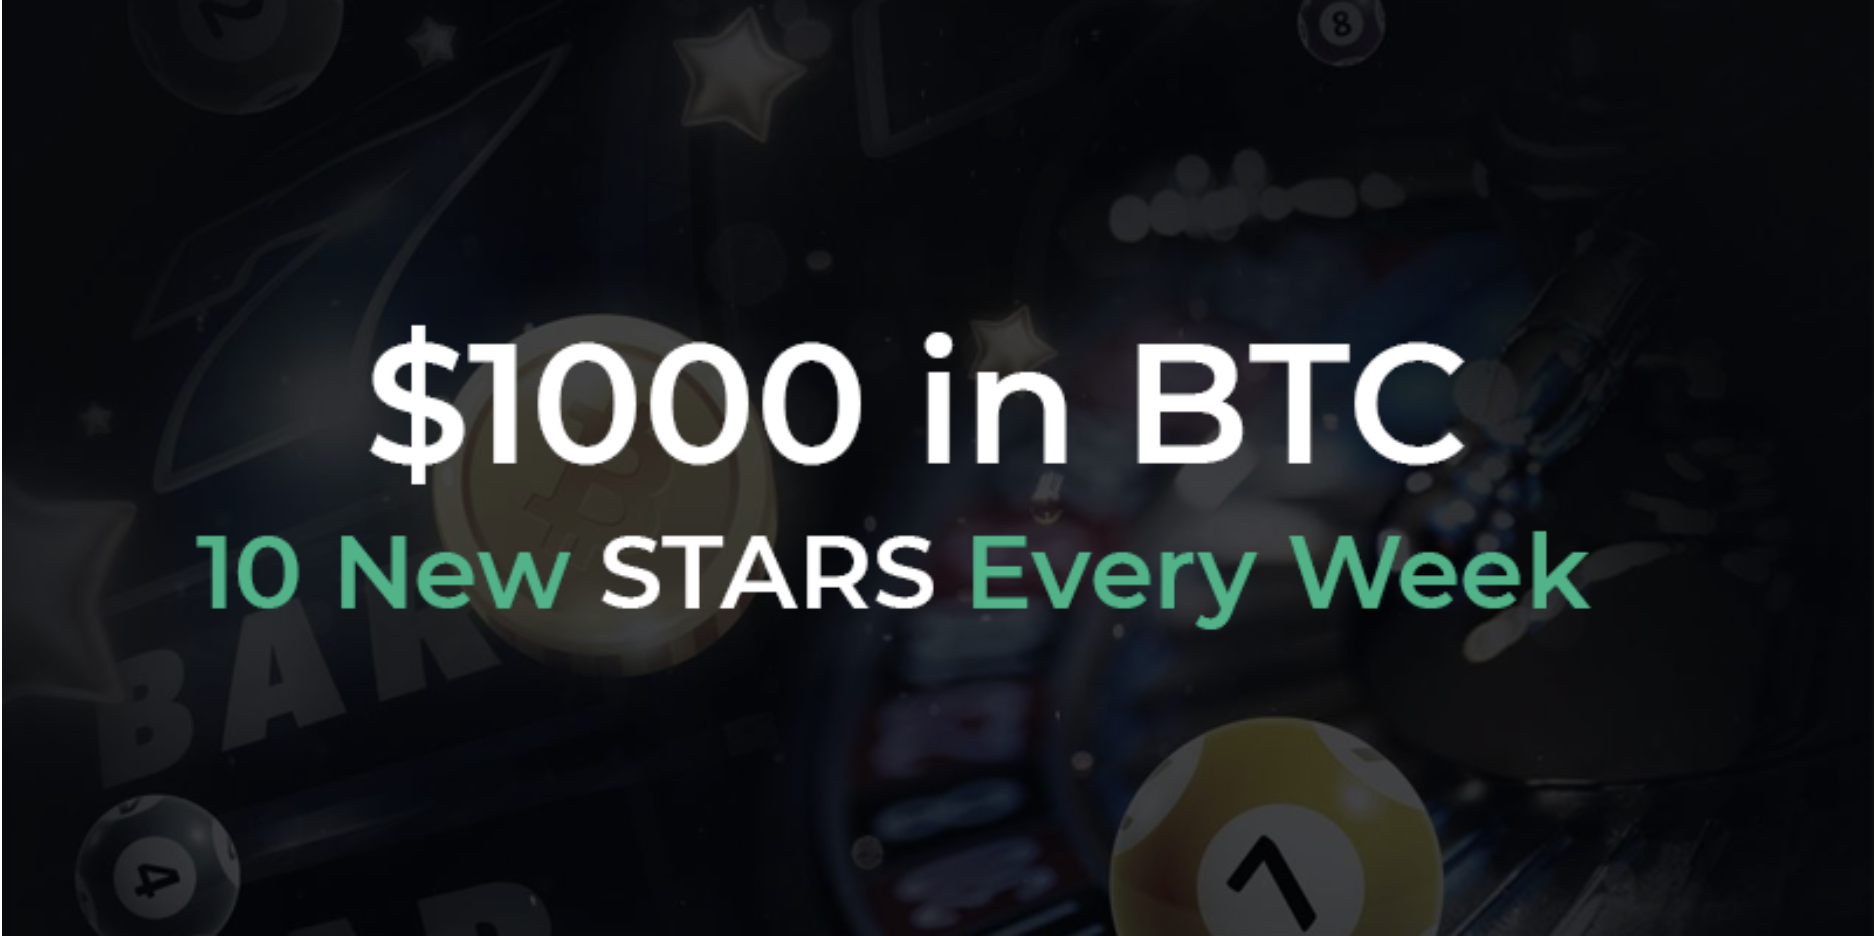 Bitcoin.com Launches Games Stars Leaderboard – Win BTC Every Week